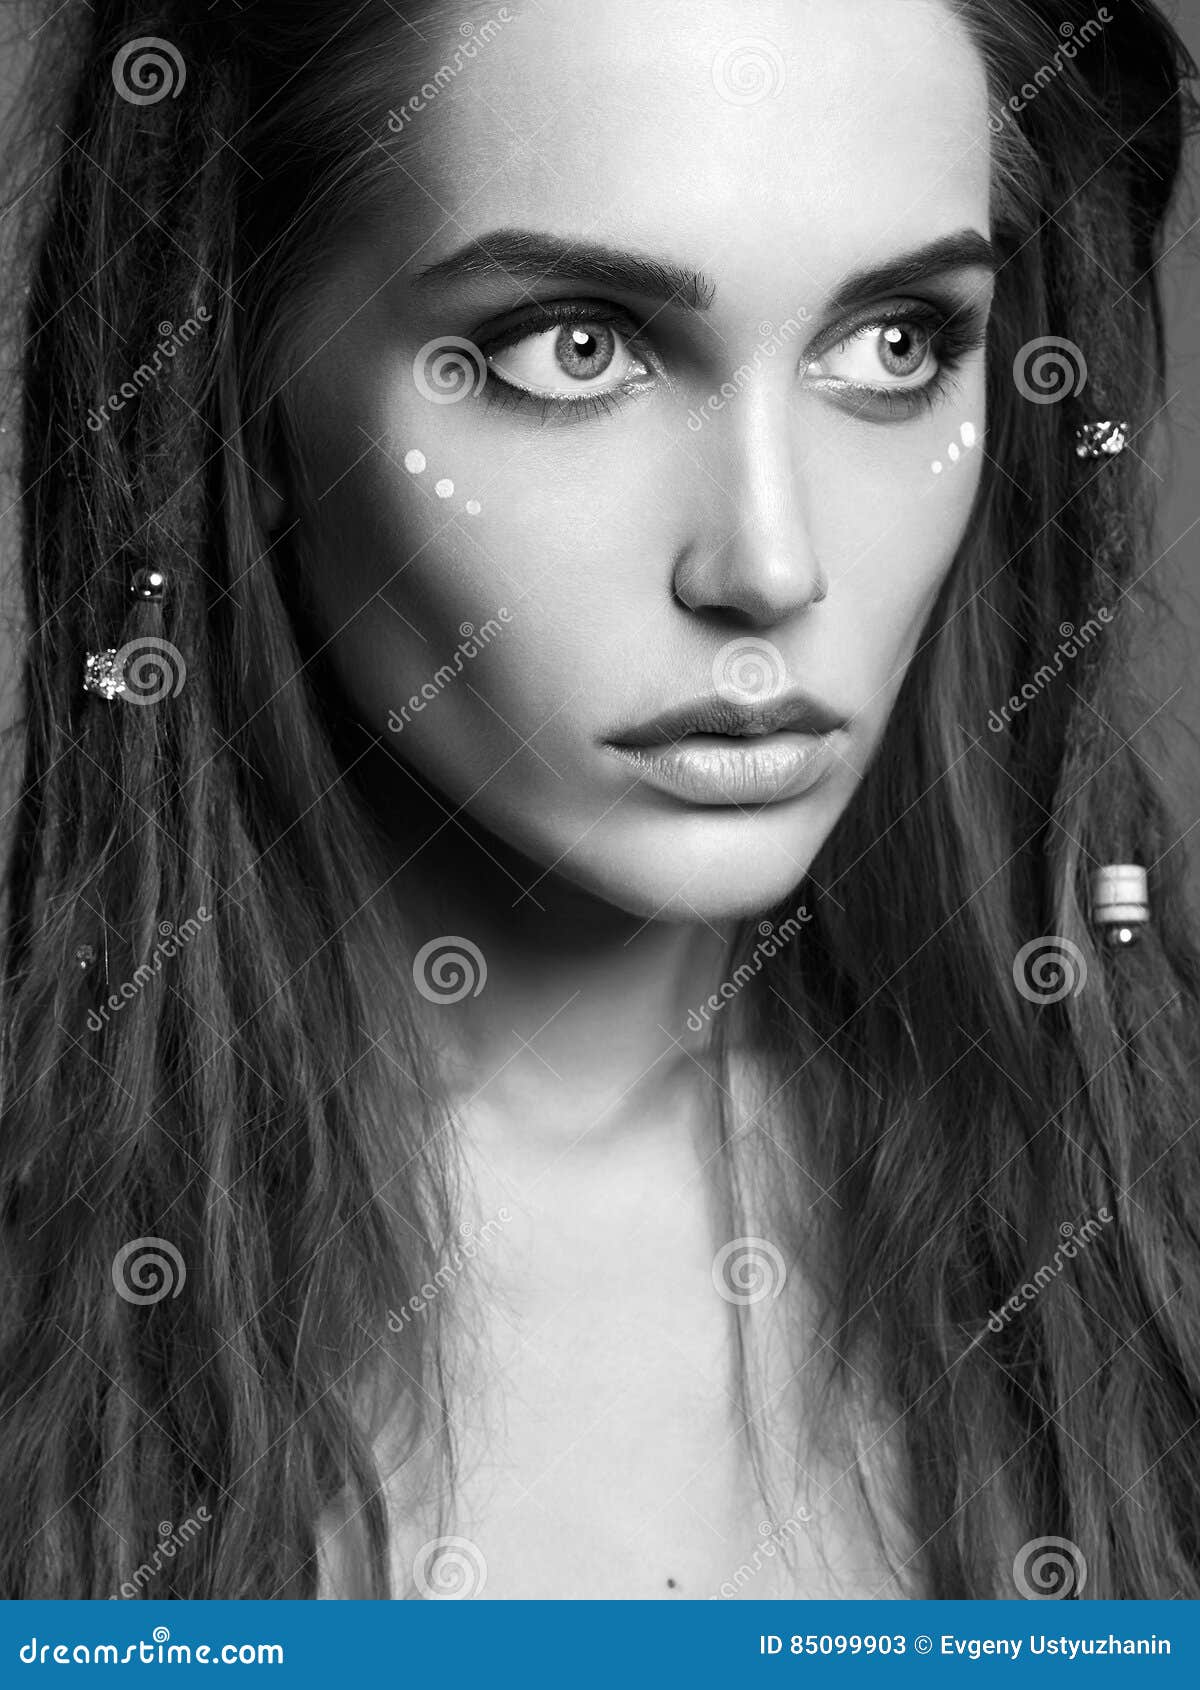 Fashion Black And White Portrait Of Beautiful Girl With